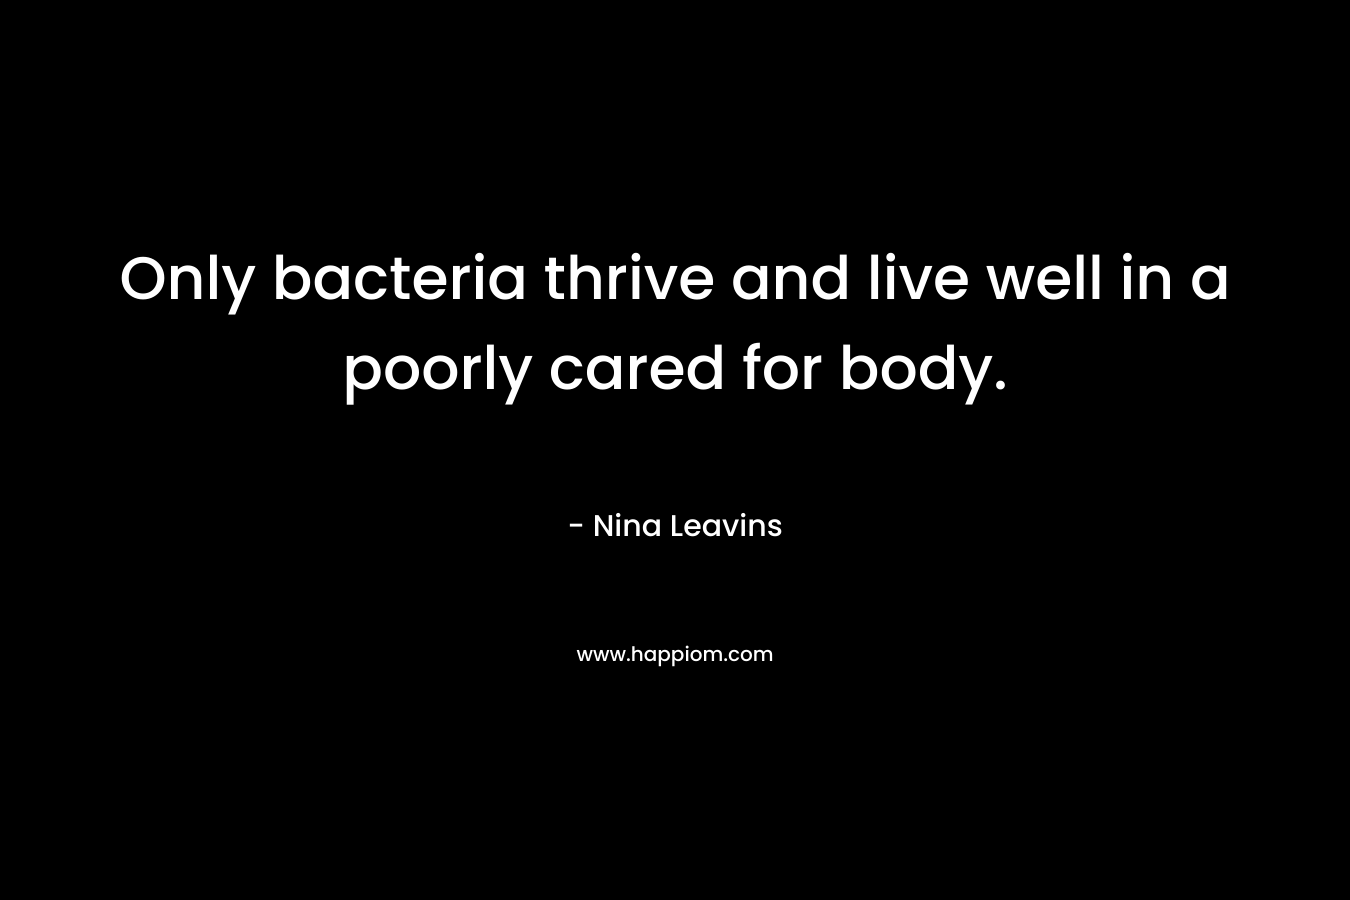 Only bacteria thrive and live well in a poorly cared for body. – Nina Leavins